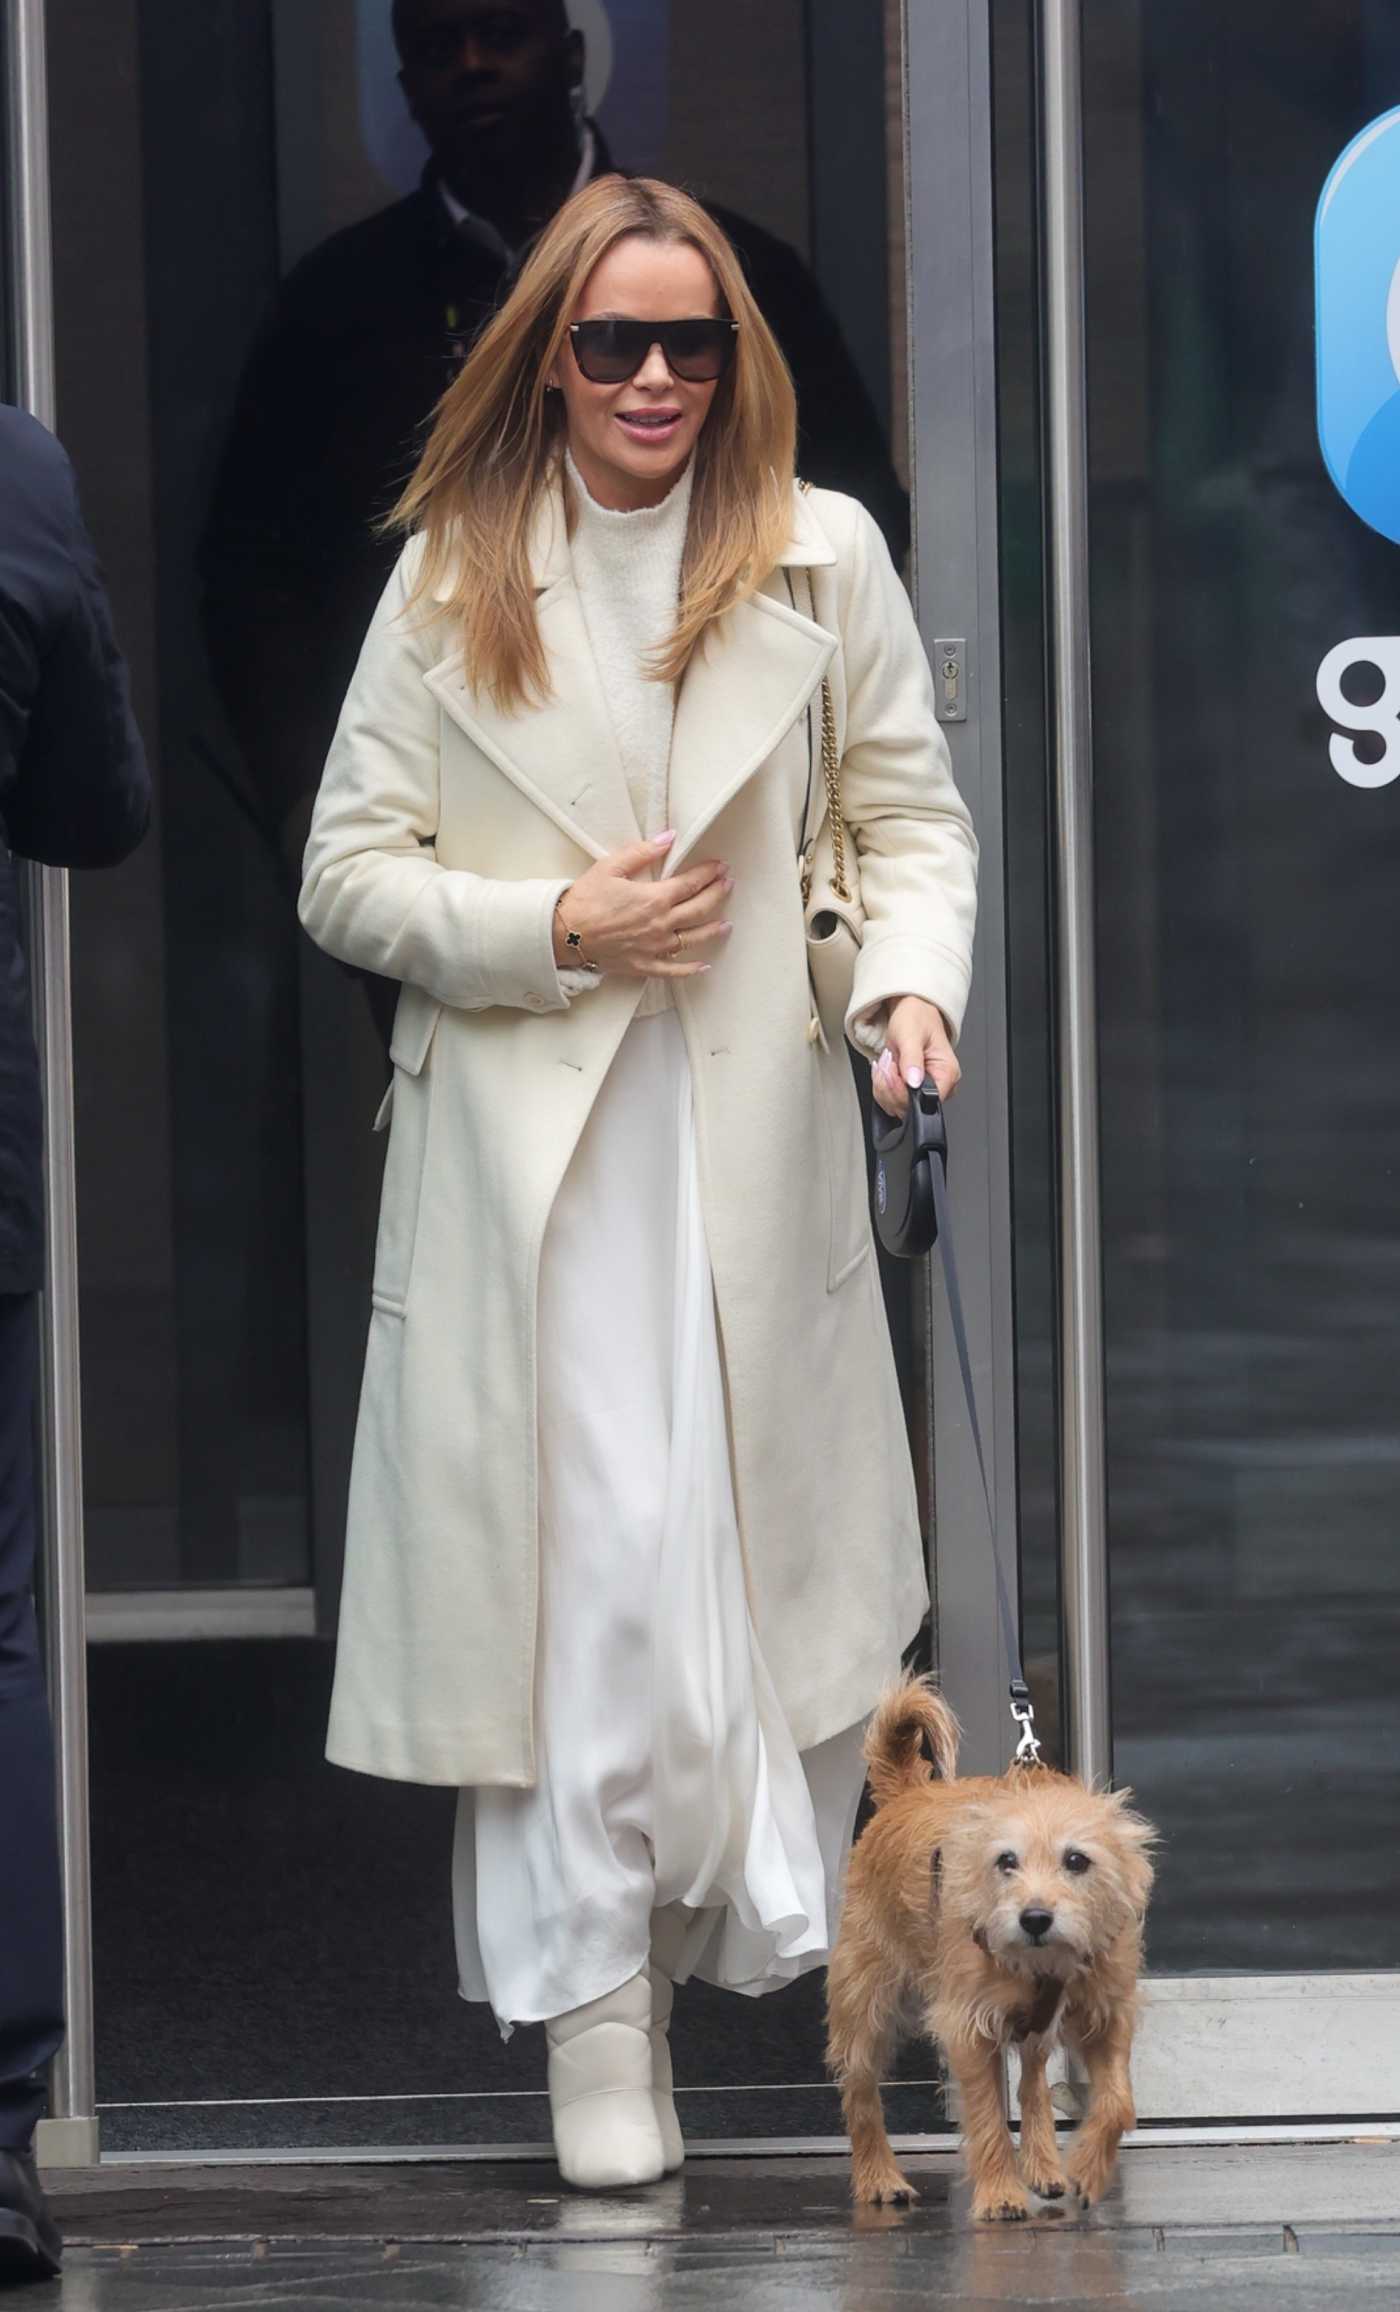 Amanda Holden in a White Coat Exits the Heart Radio with Her Pet Dog Rudie in London 03/17/2023